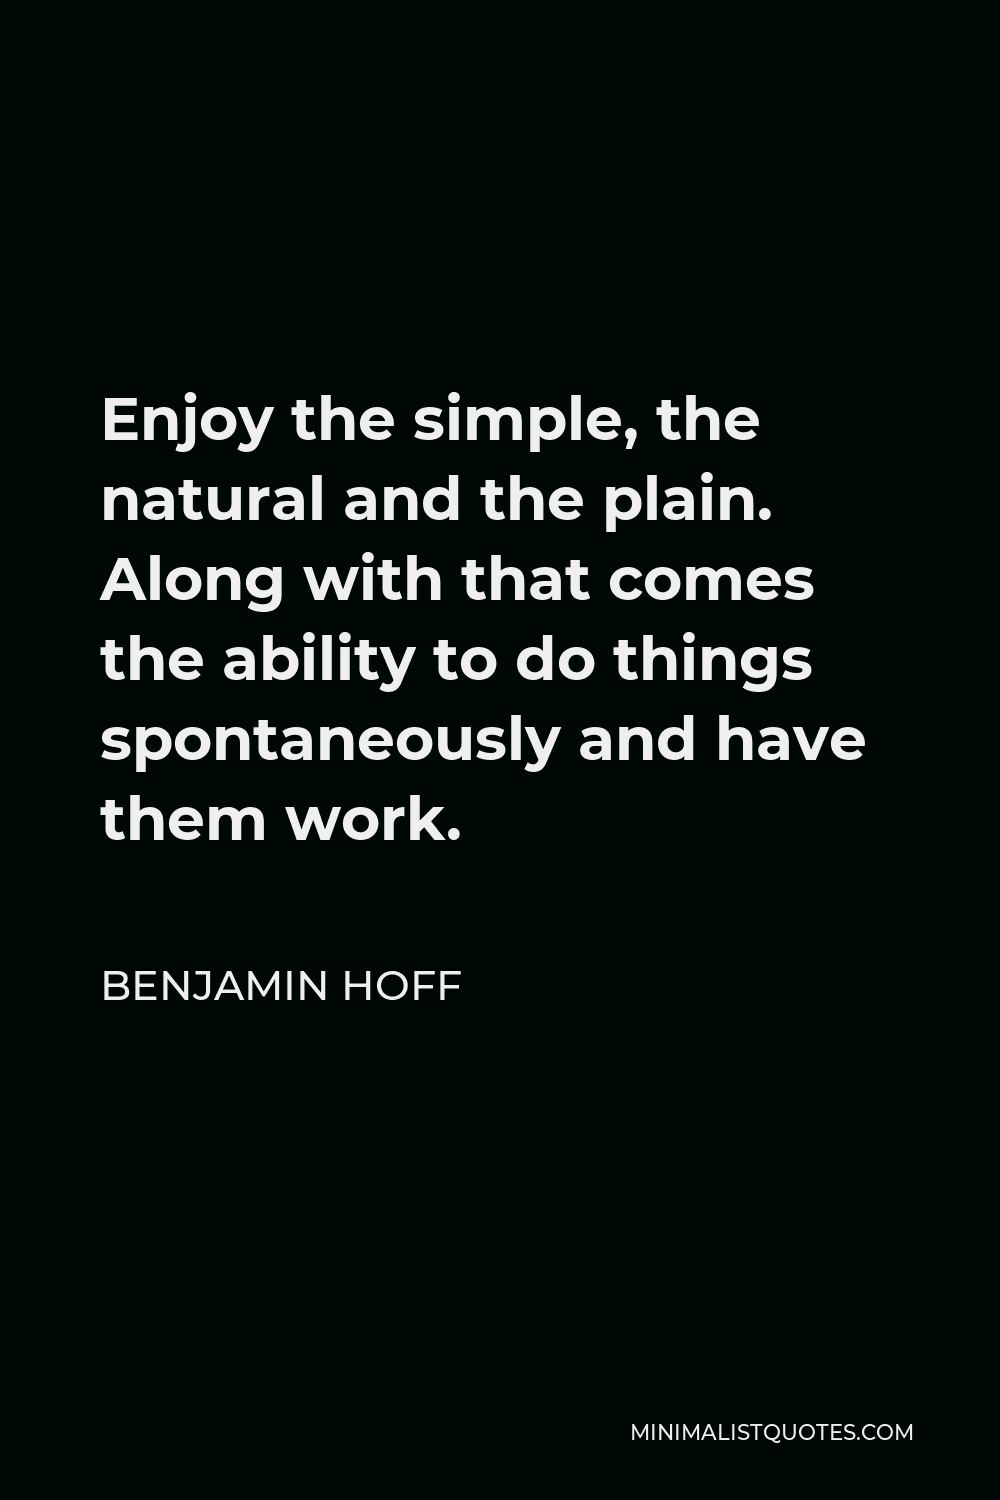 Benjamin Hoff Quote - Enjoy the simple, the natural and the plain. Along with that comes the ability to do things spontaneously and have them work.